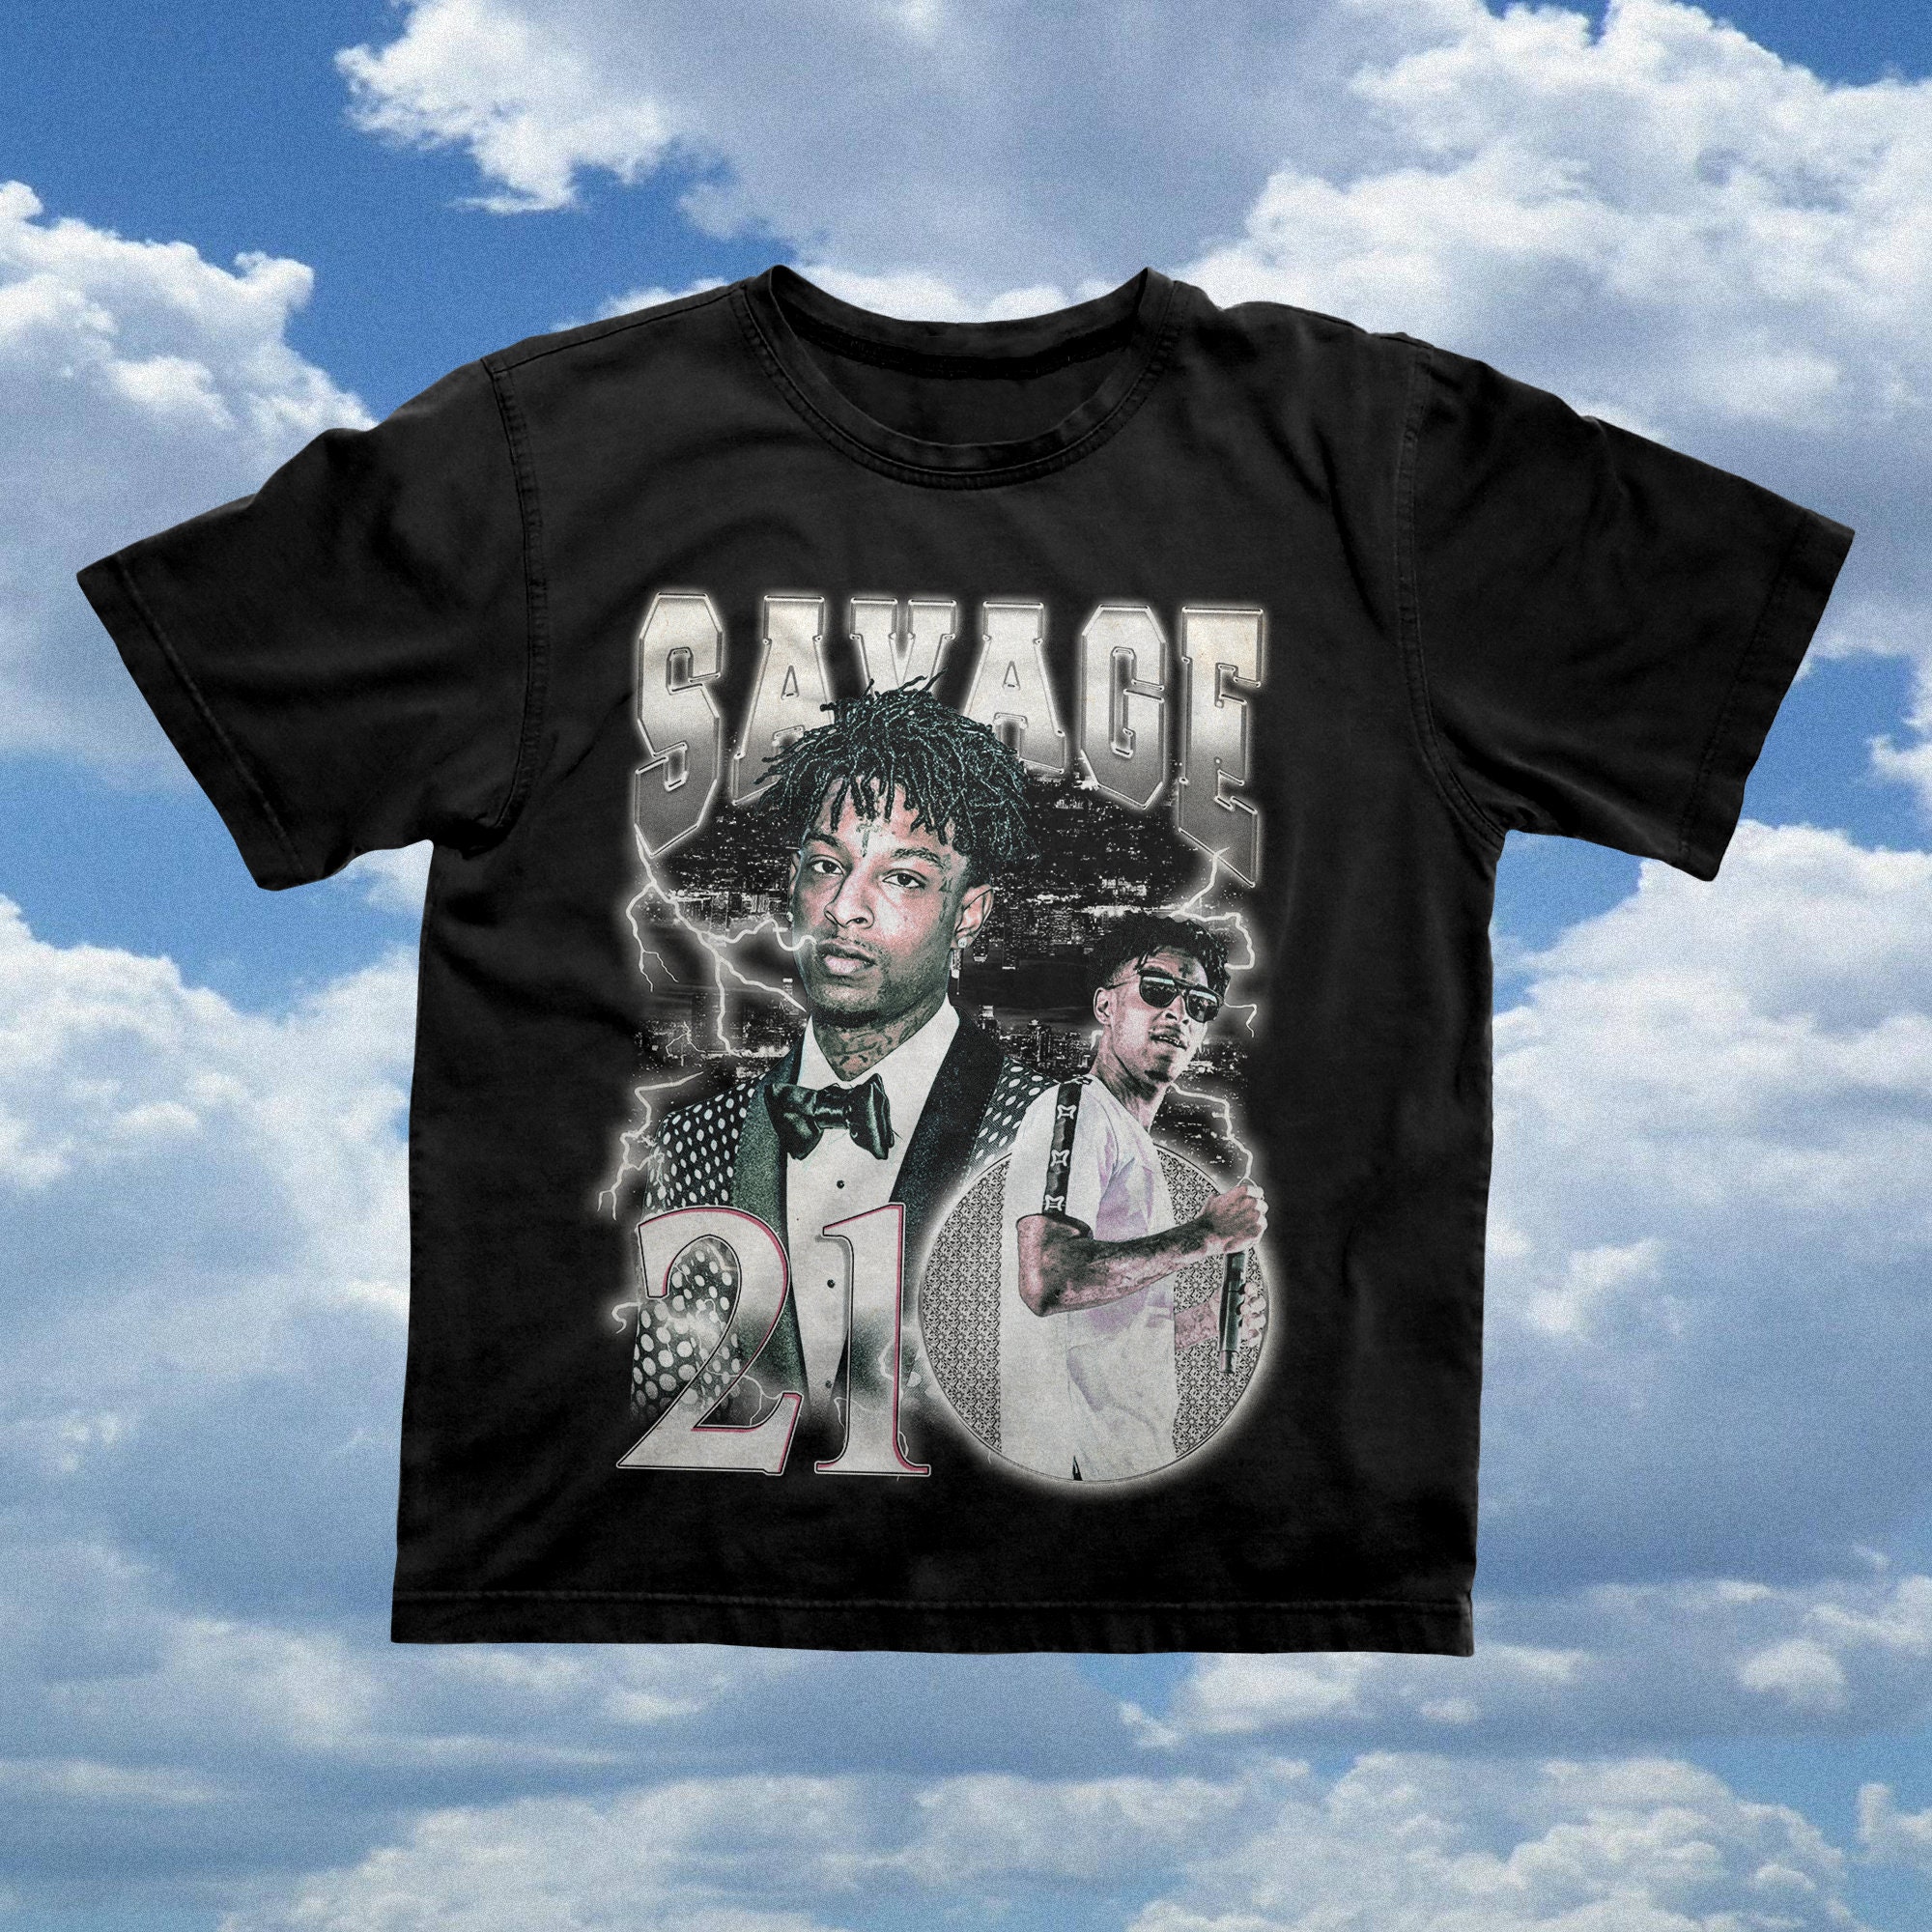 Discover Vintage Inspired 21 Savage Graphic Rap Tee